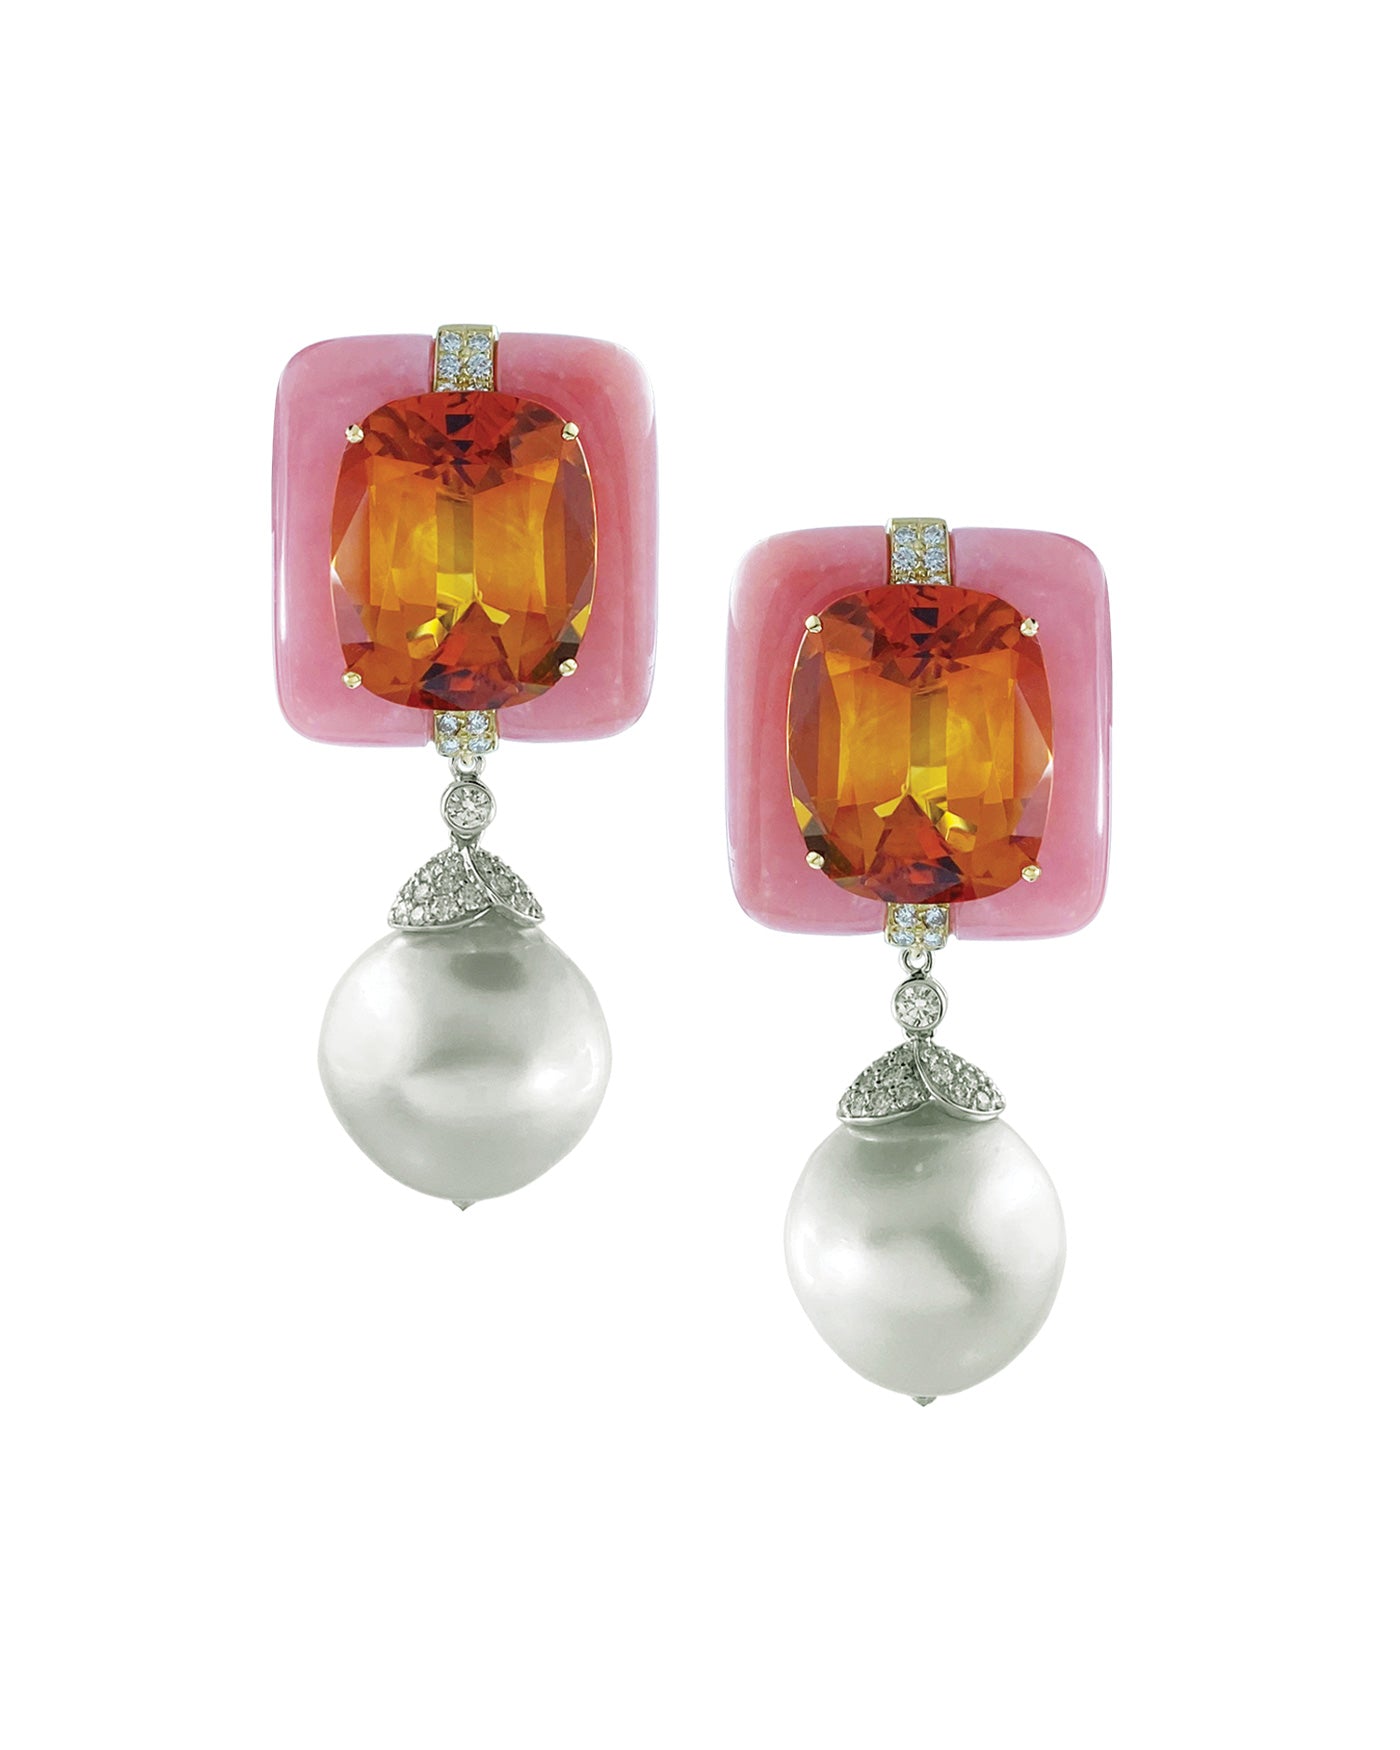 Madeira Citrine & Pink Opal Earrings accented with diamonds, finished by a pair of detachable Australian South Sea pearl drops, crafted in 18 karat yellow and white gold